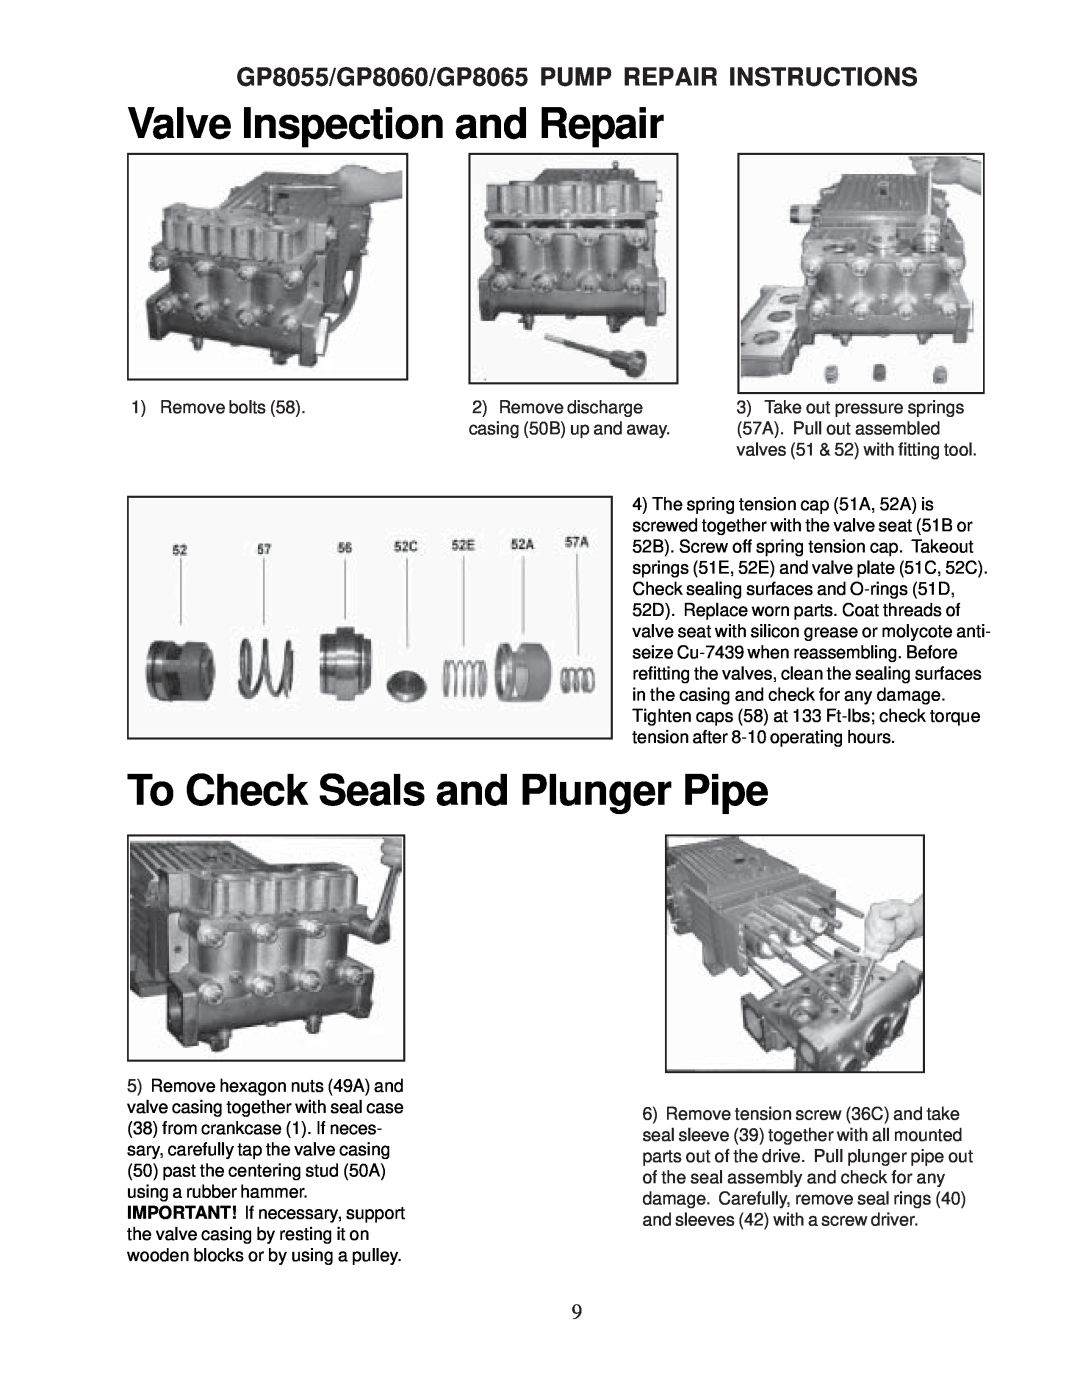 Giant Valve Inspection and Repair, To Check Seals and Plunger Pipe, GP8055/GP8060/GP8065 PUMP REPAIR INSTRUCTIONS 